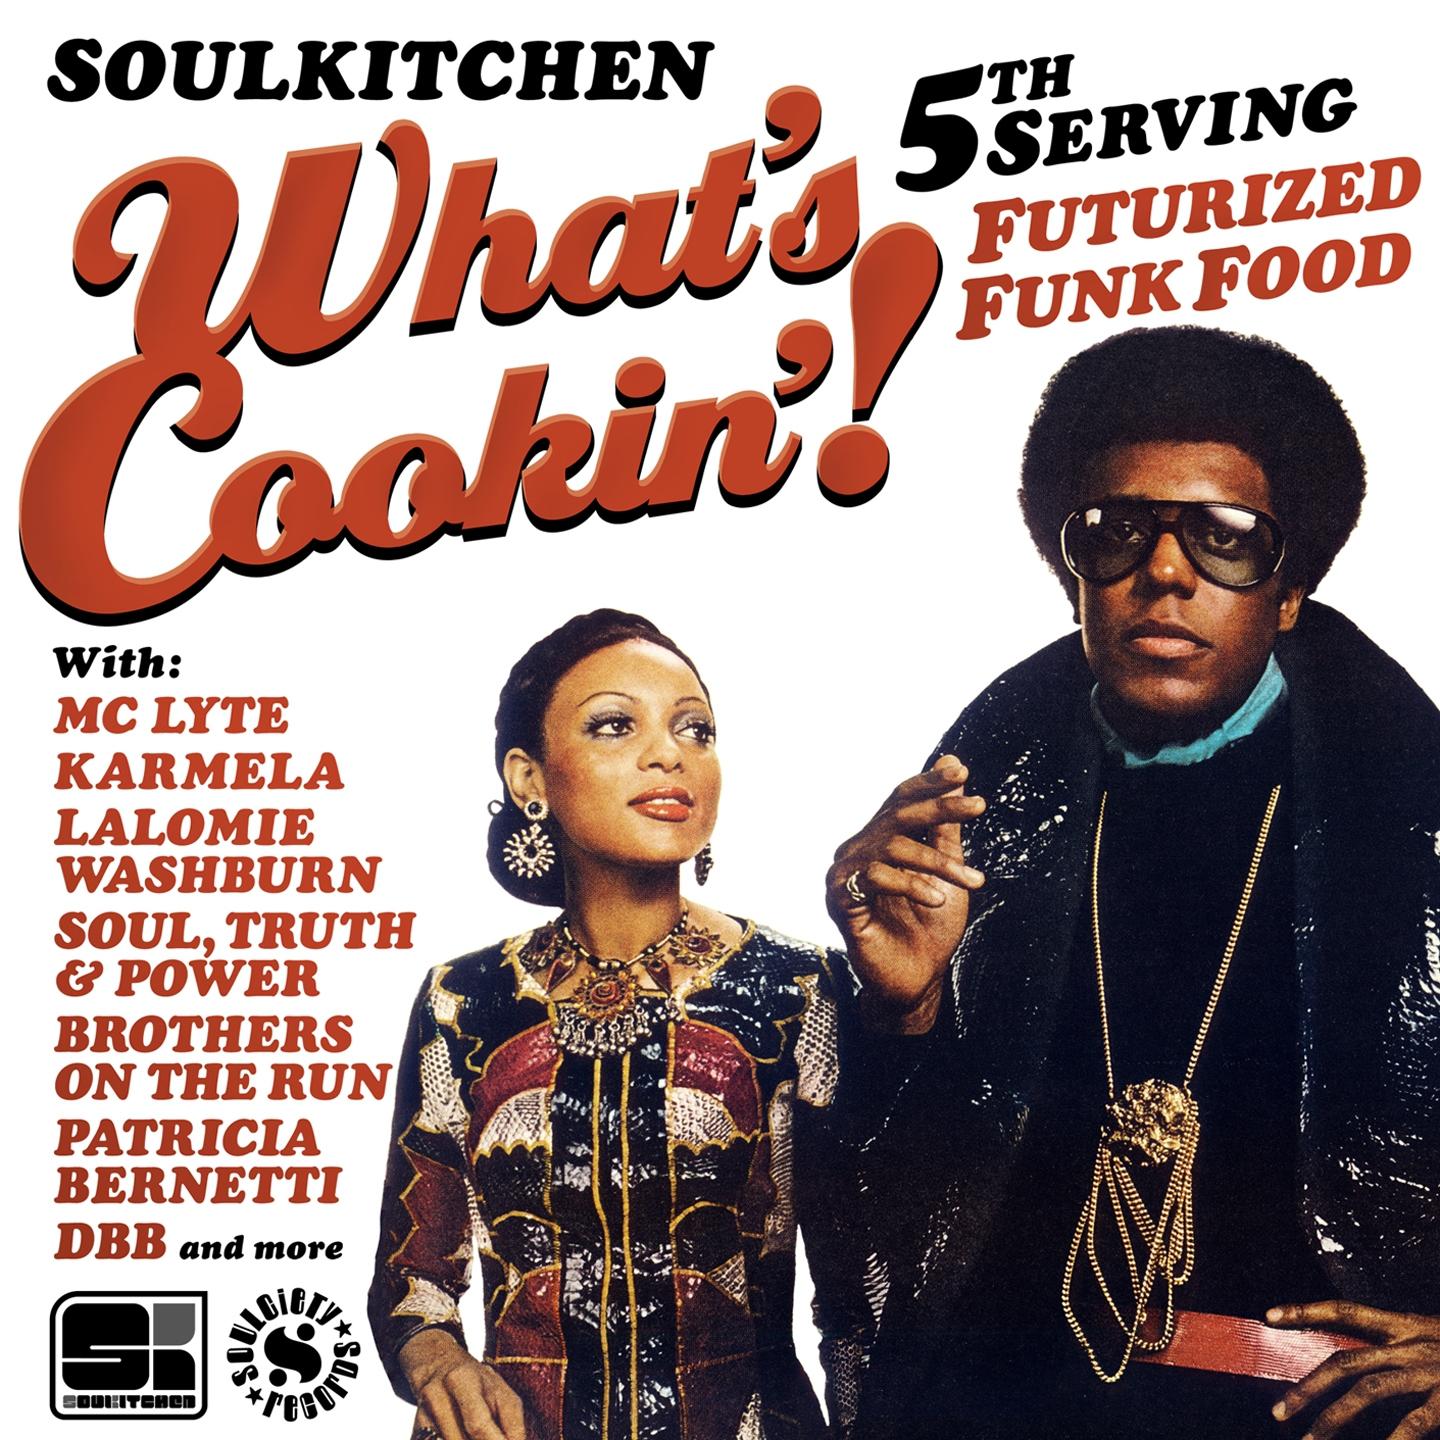 Постер альбома Soulkitchen What's Cookin'! 5th Serving (Futurized Funk Food)